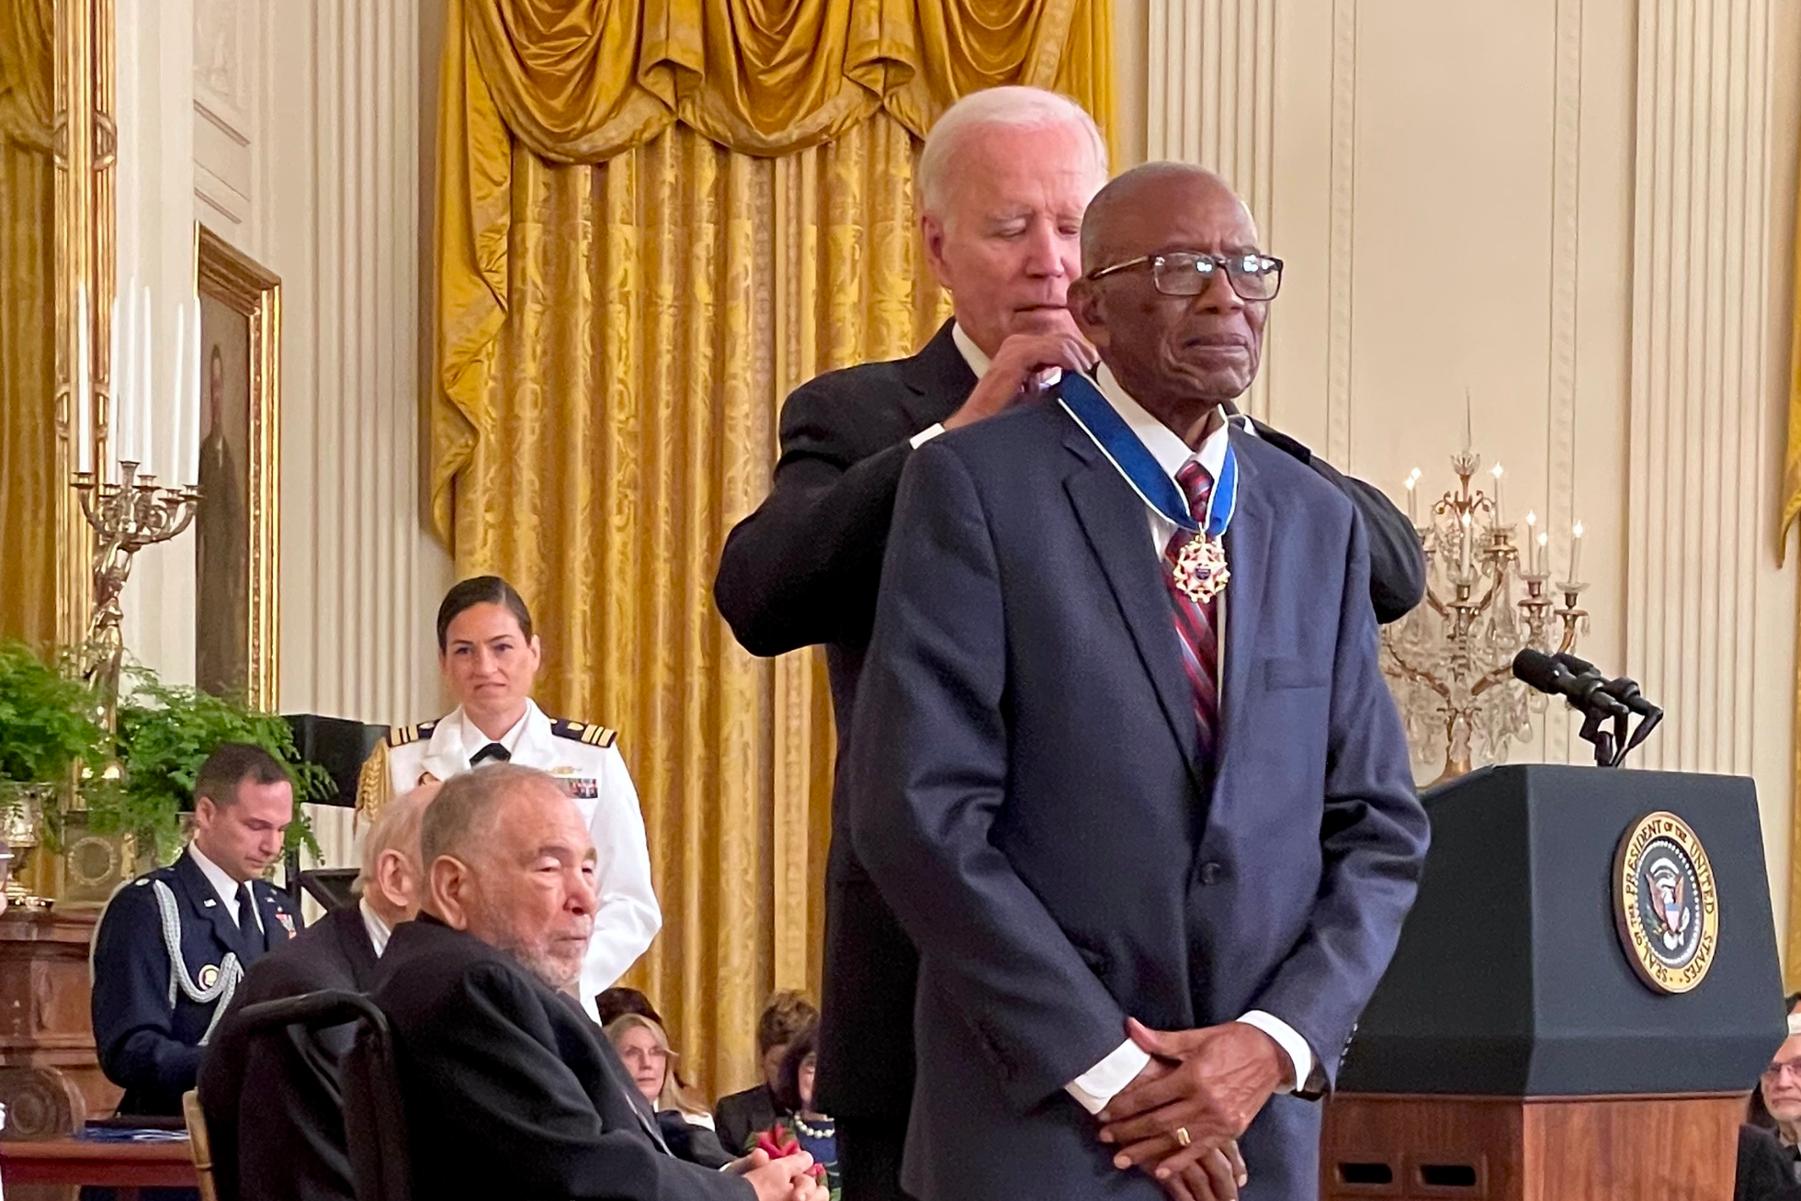 Read More - President Biden Awards the Presidential Medal of Freedom to Civil Rights Attorney Fred Gray, Sr.